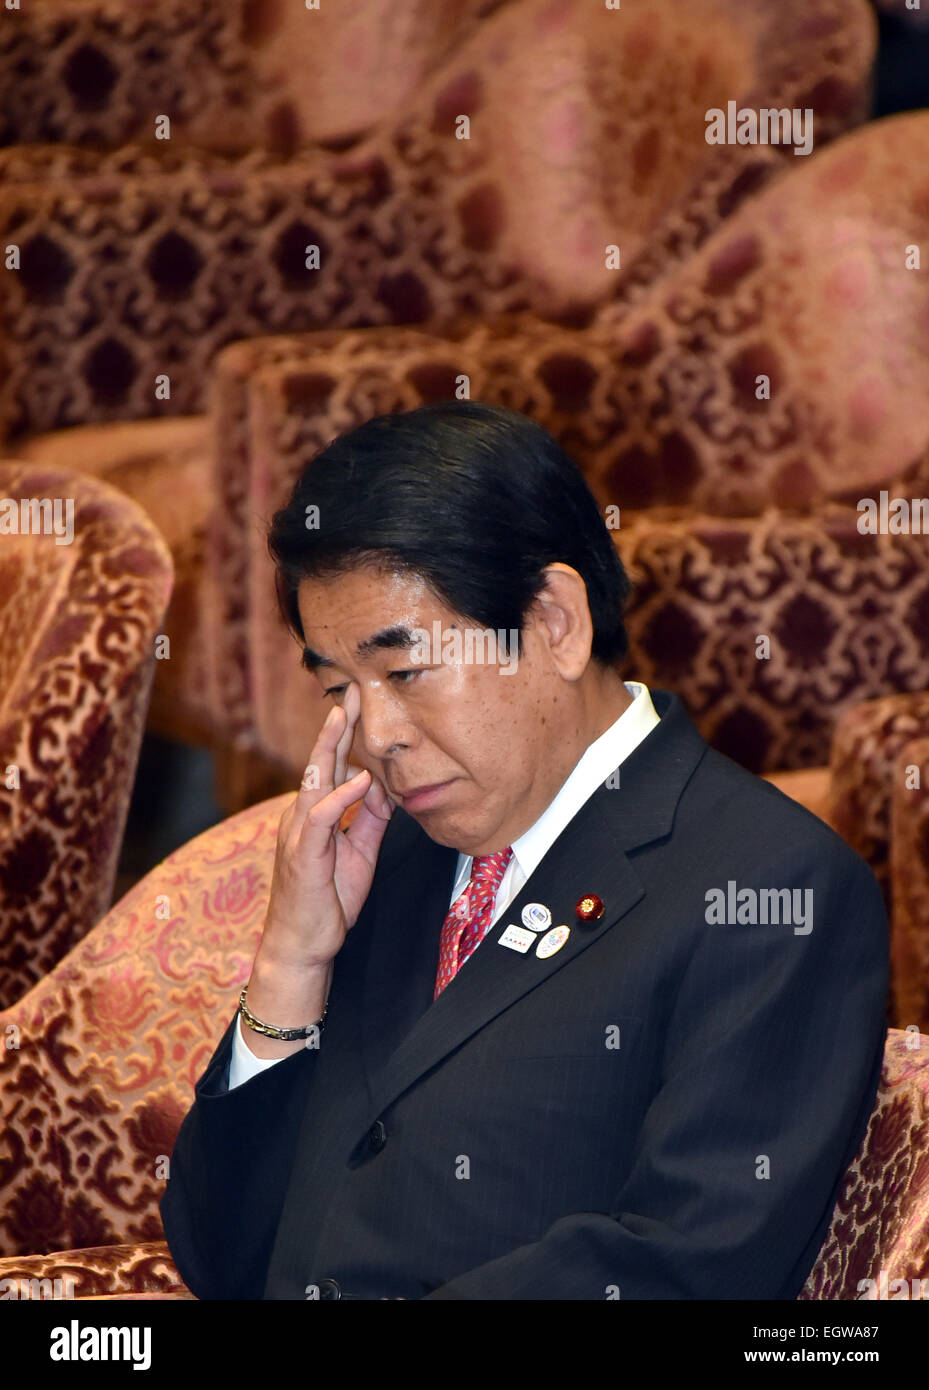 Tokyo, Japan. 3rd Mar, 2015. Education Minister Hakubun Shimomura is grilled by opposition lawmakers for his handling of political funds during a budget committee deliberation at the Diet's lower house in Tokyo on Tuesday, March 3, 2015. Shimomura denied any wrongdoing amid allegations that his regional support groups were not registered as political organizations. © Natsuki Sakai/AFLO/Alamy Live News Stock Photo